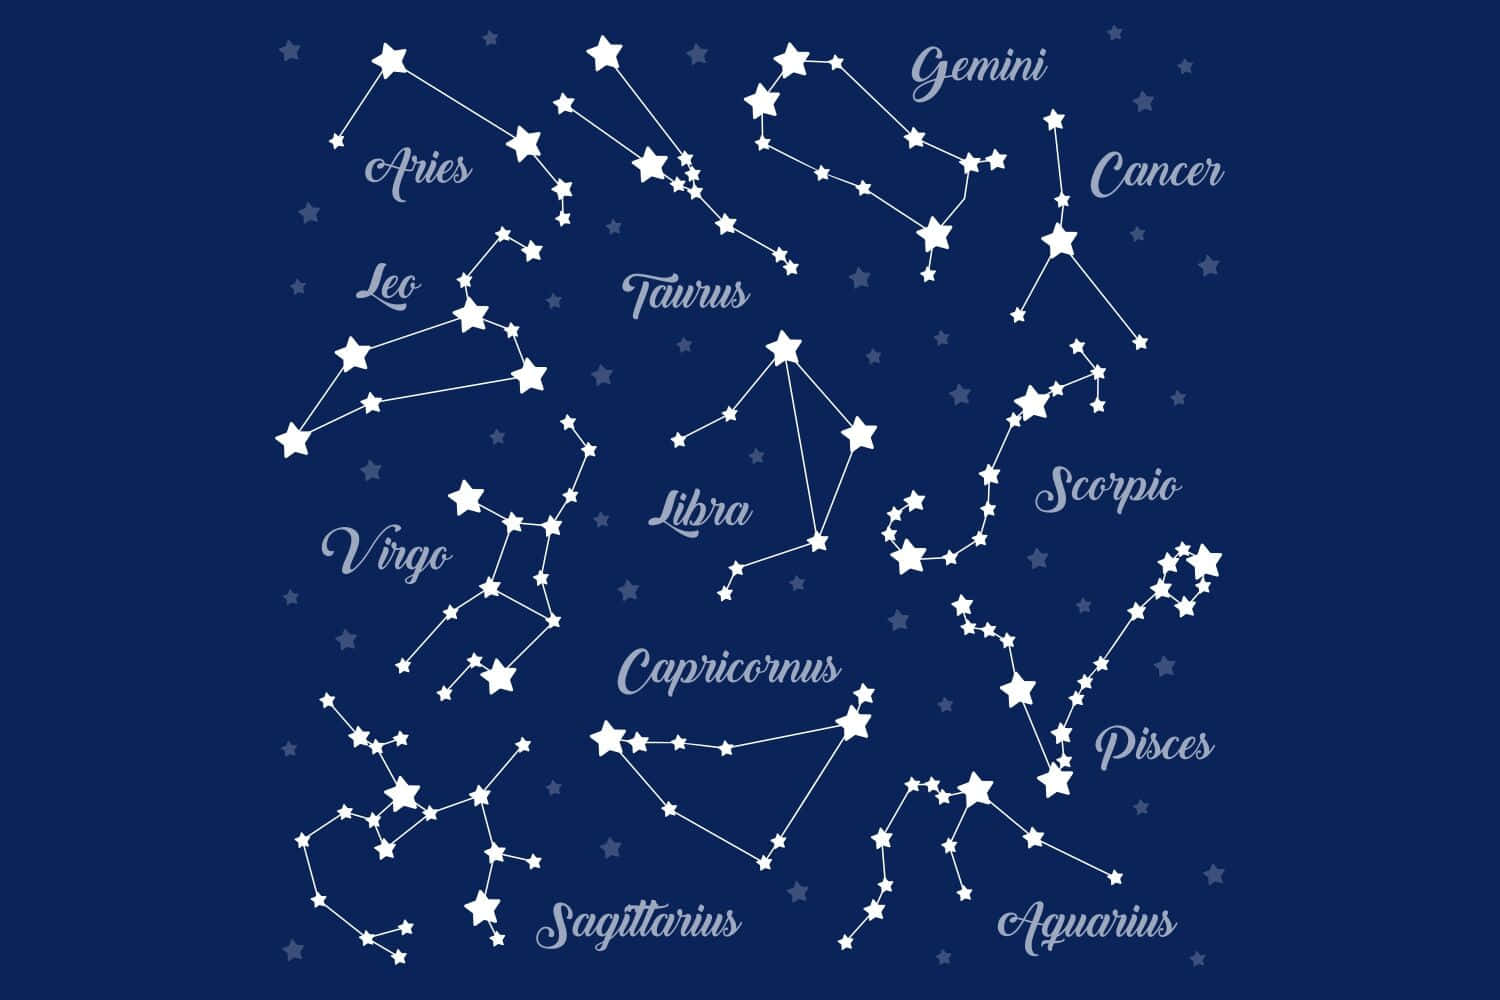 Zodiac Signs - The Foundation of Astrology